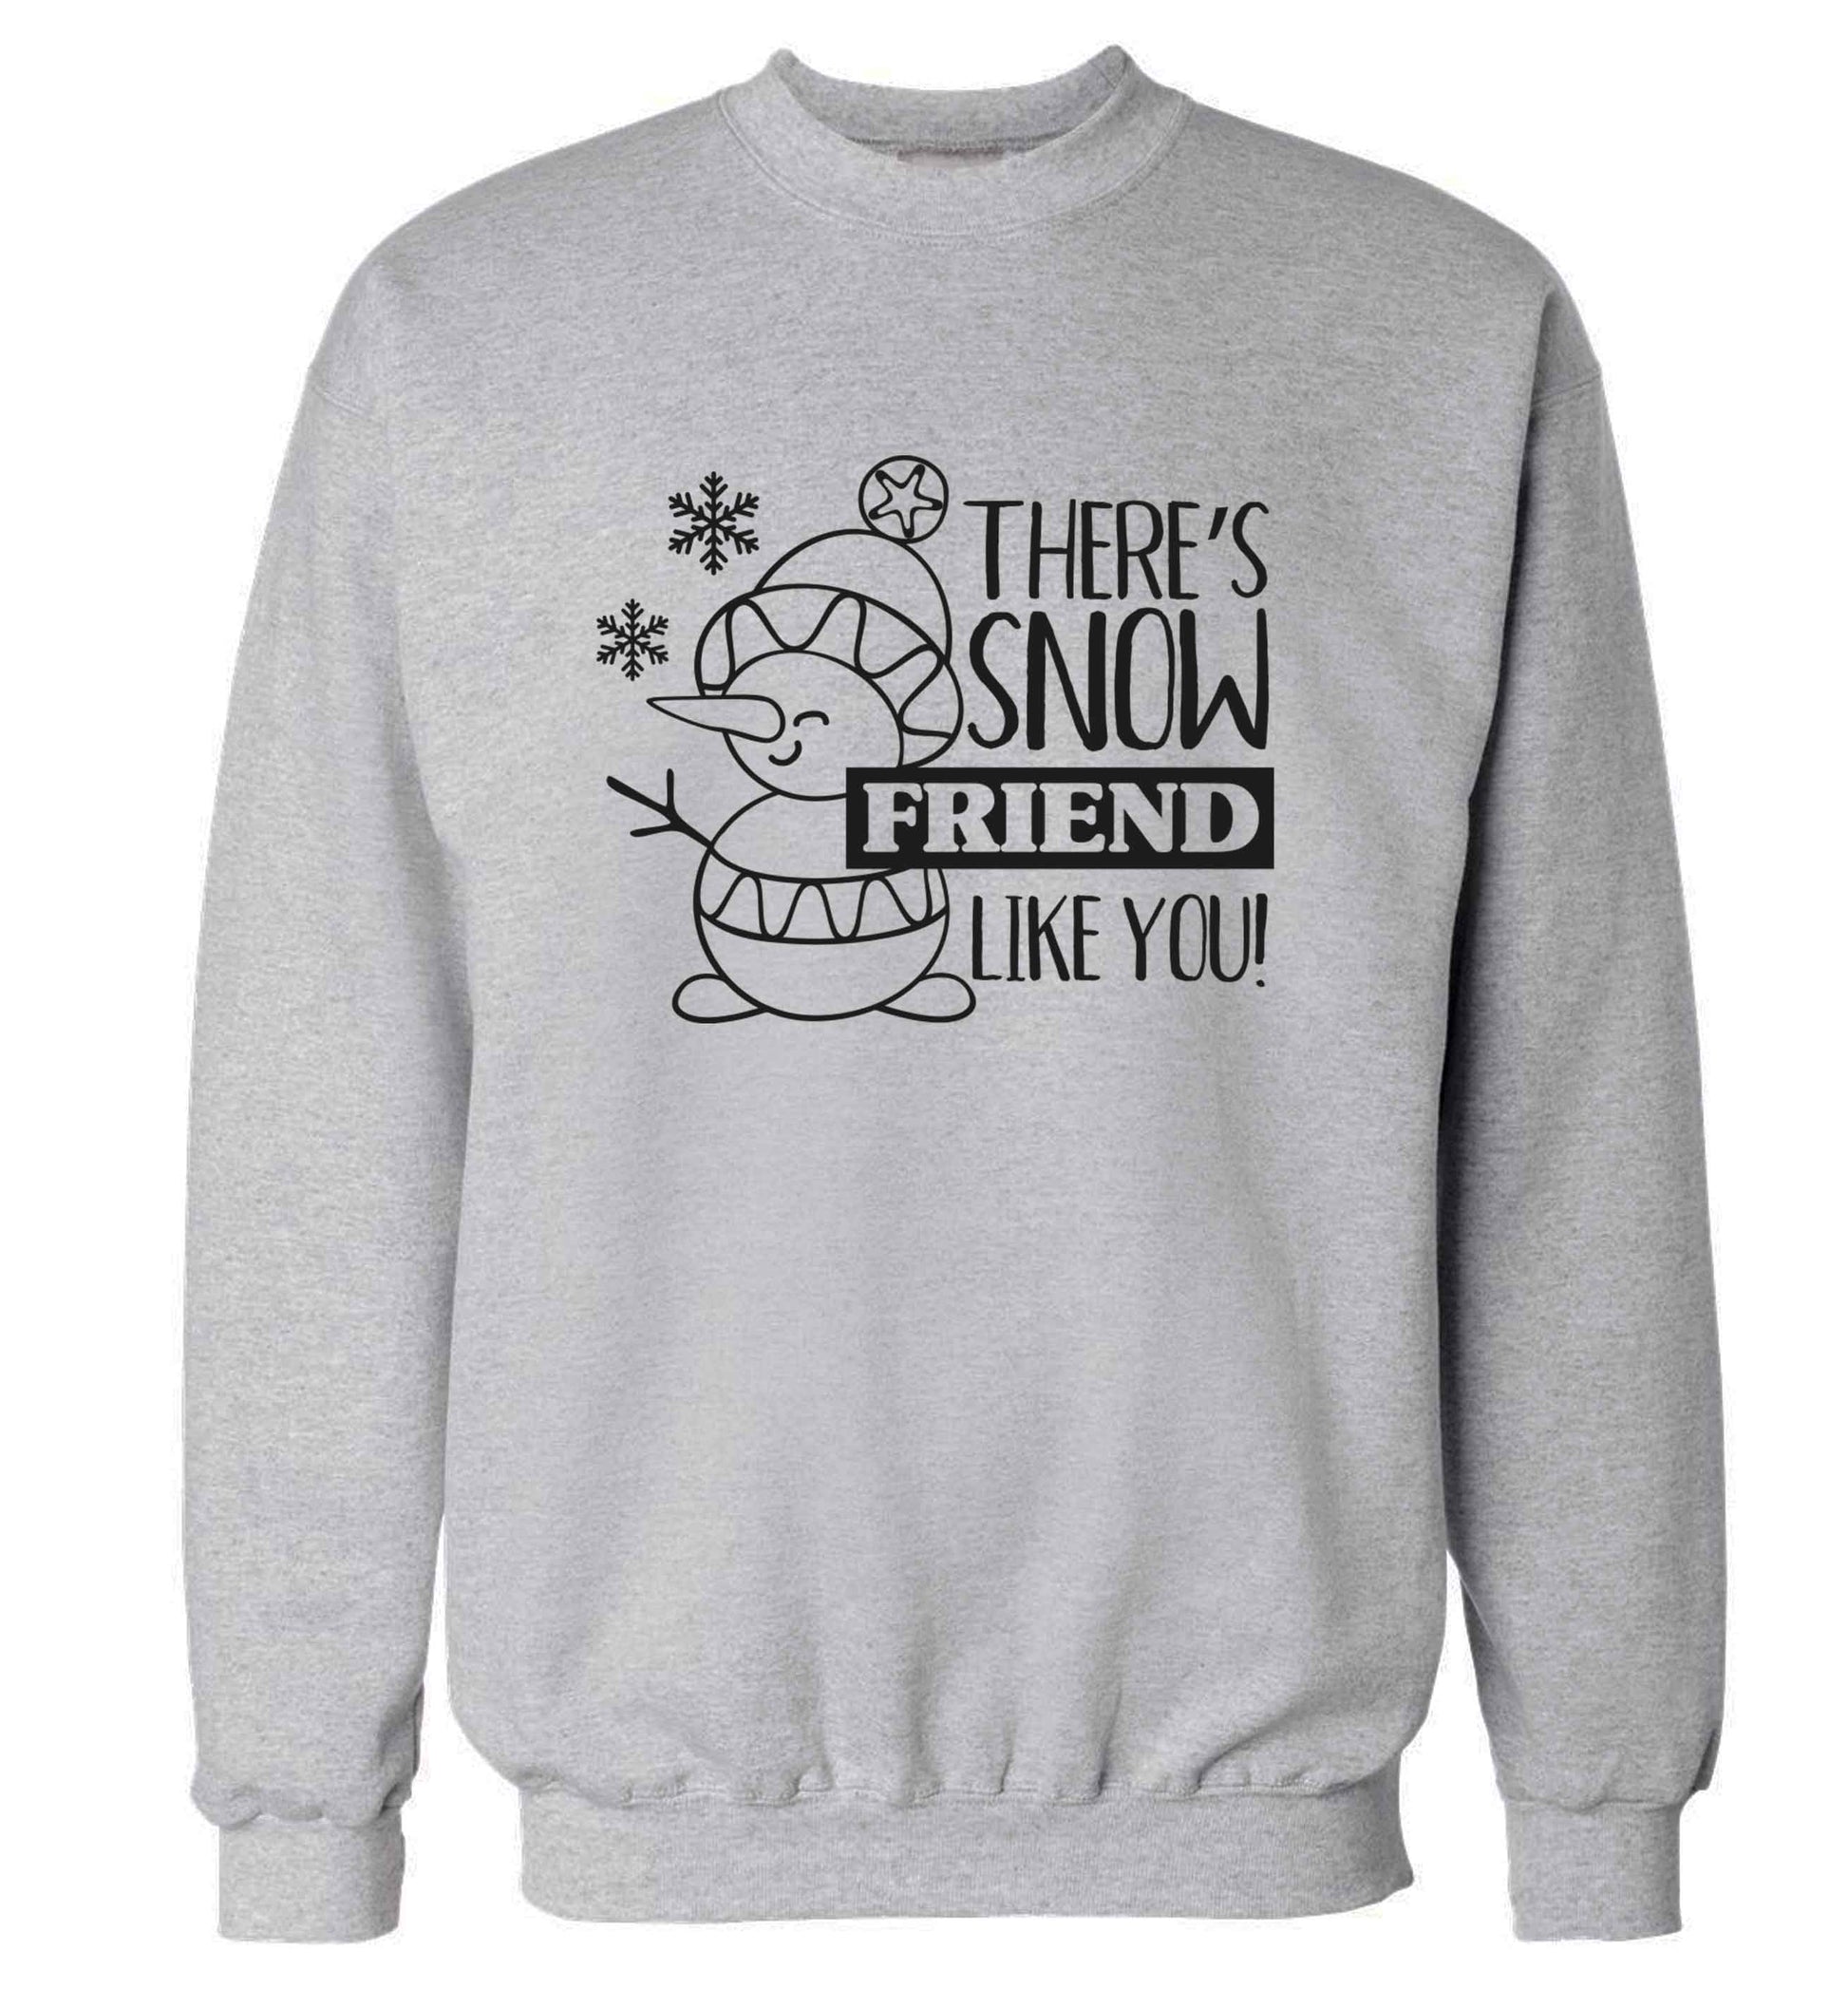 There's snow friend like you adult's unisex grey sweater 2XL